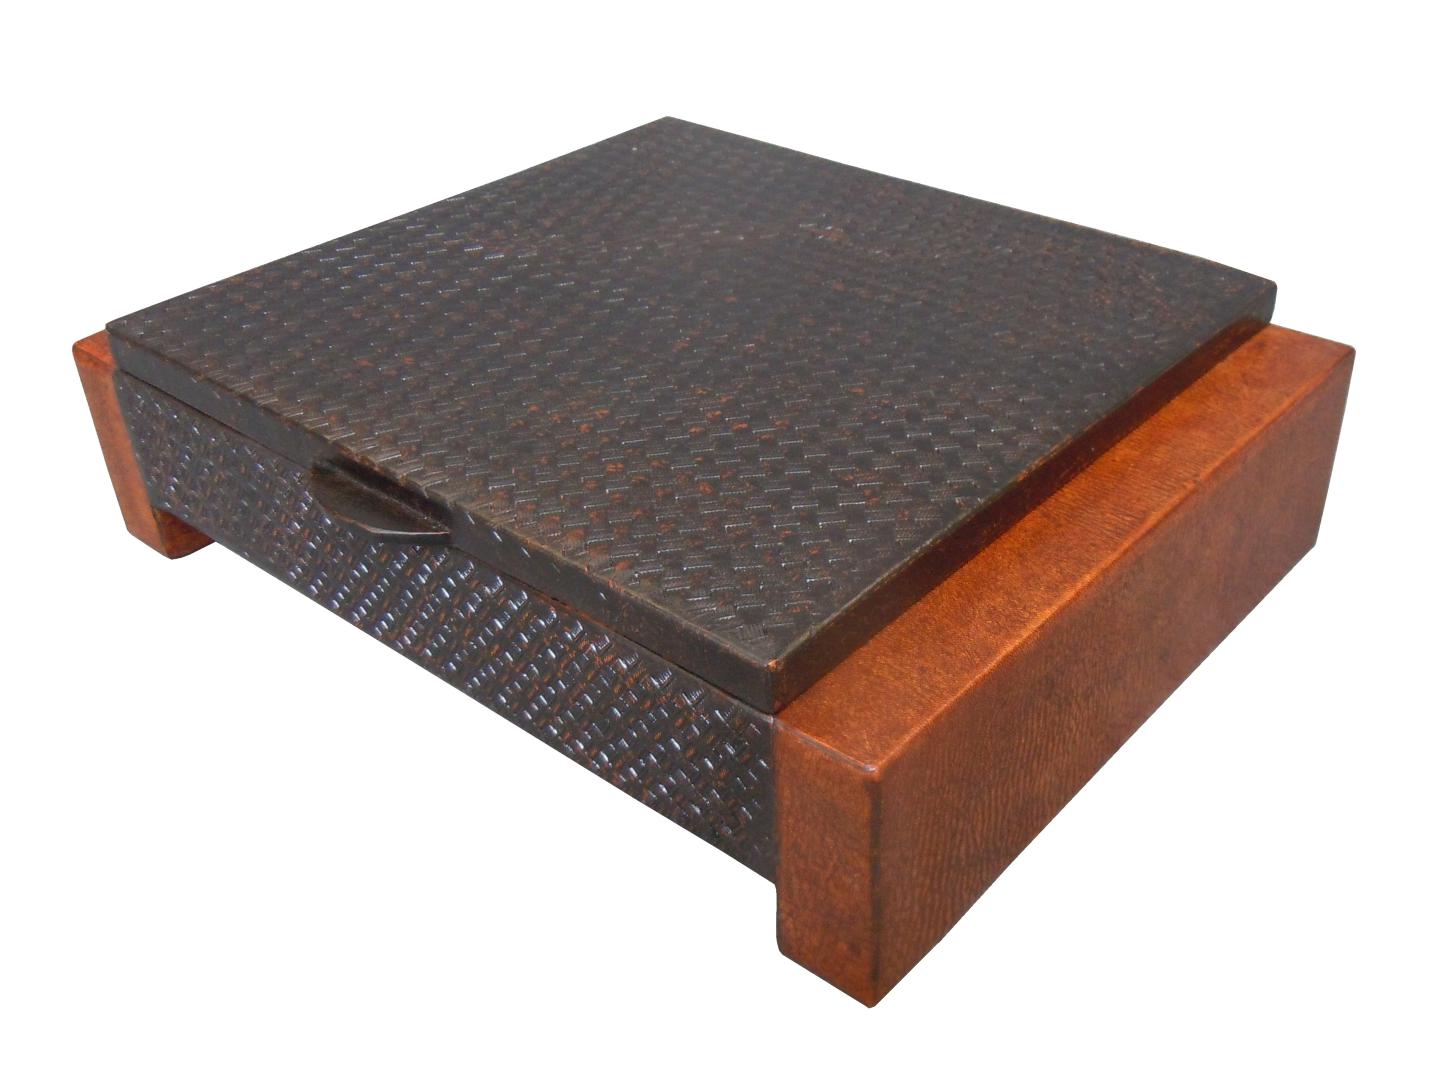 leather box with a braided design on the top